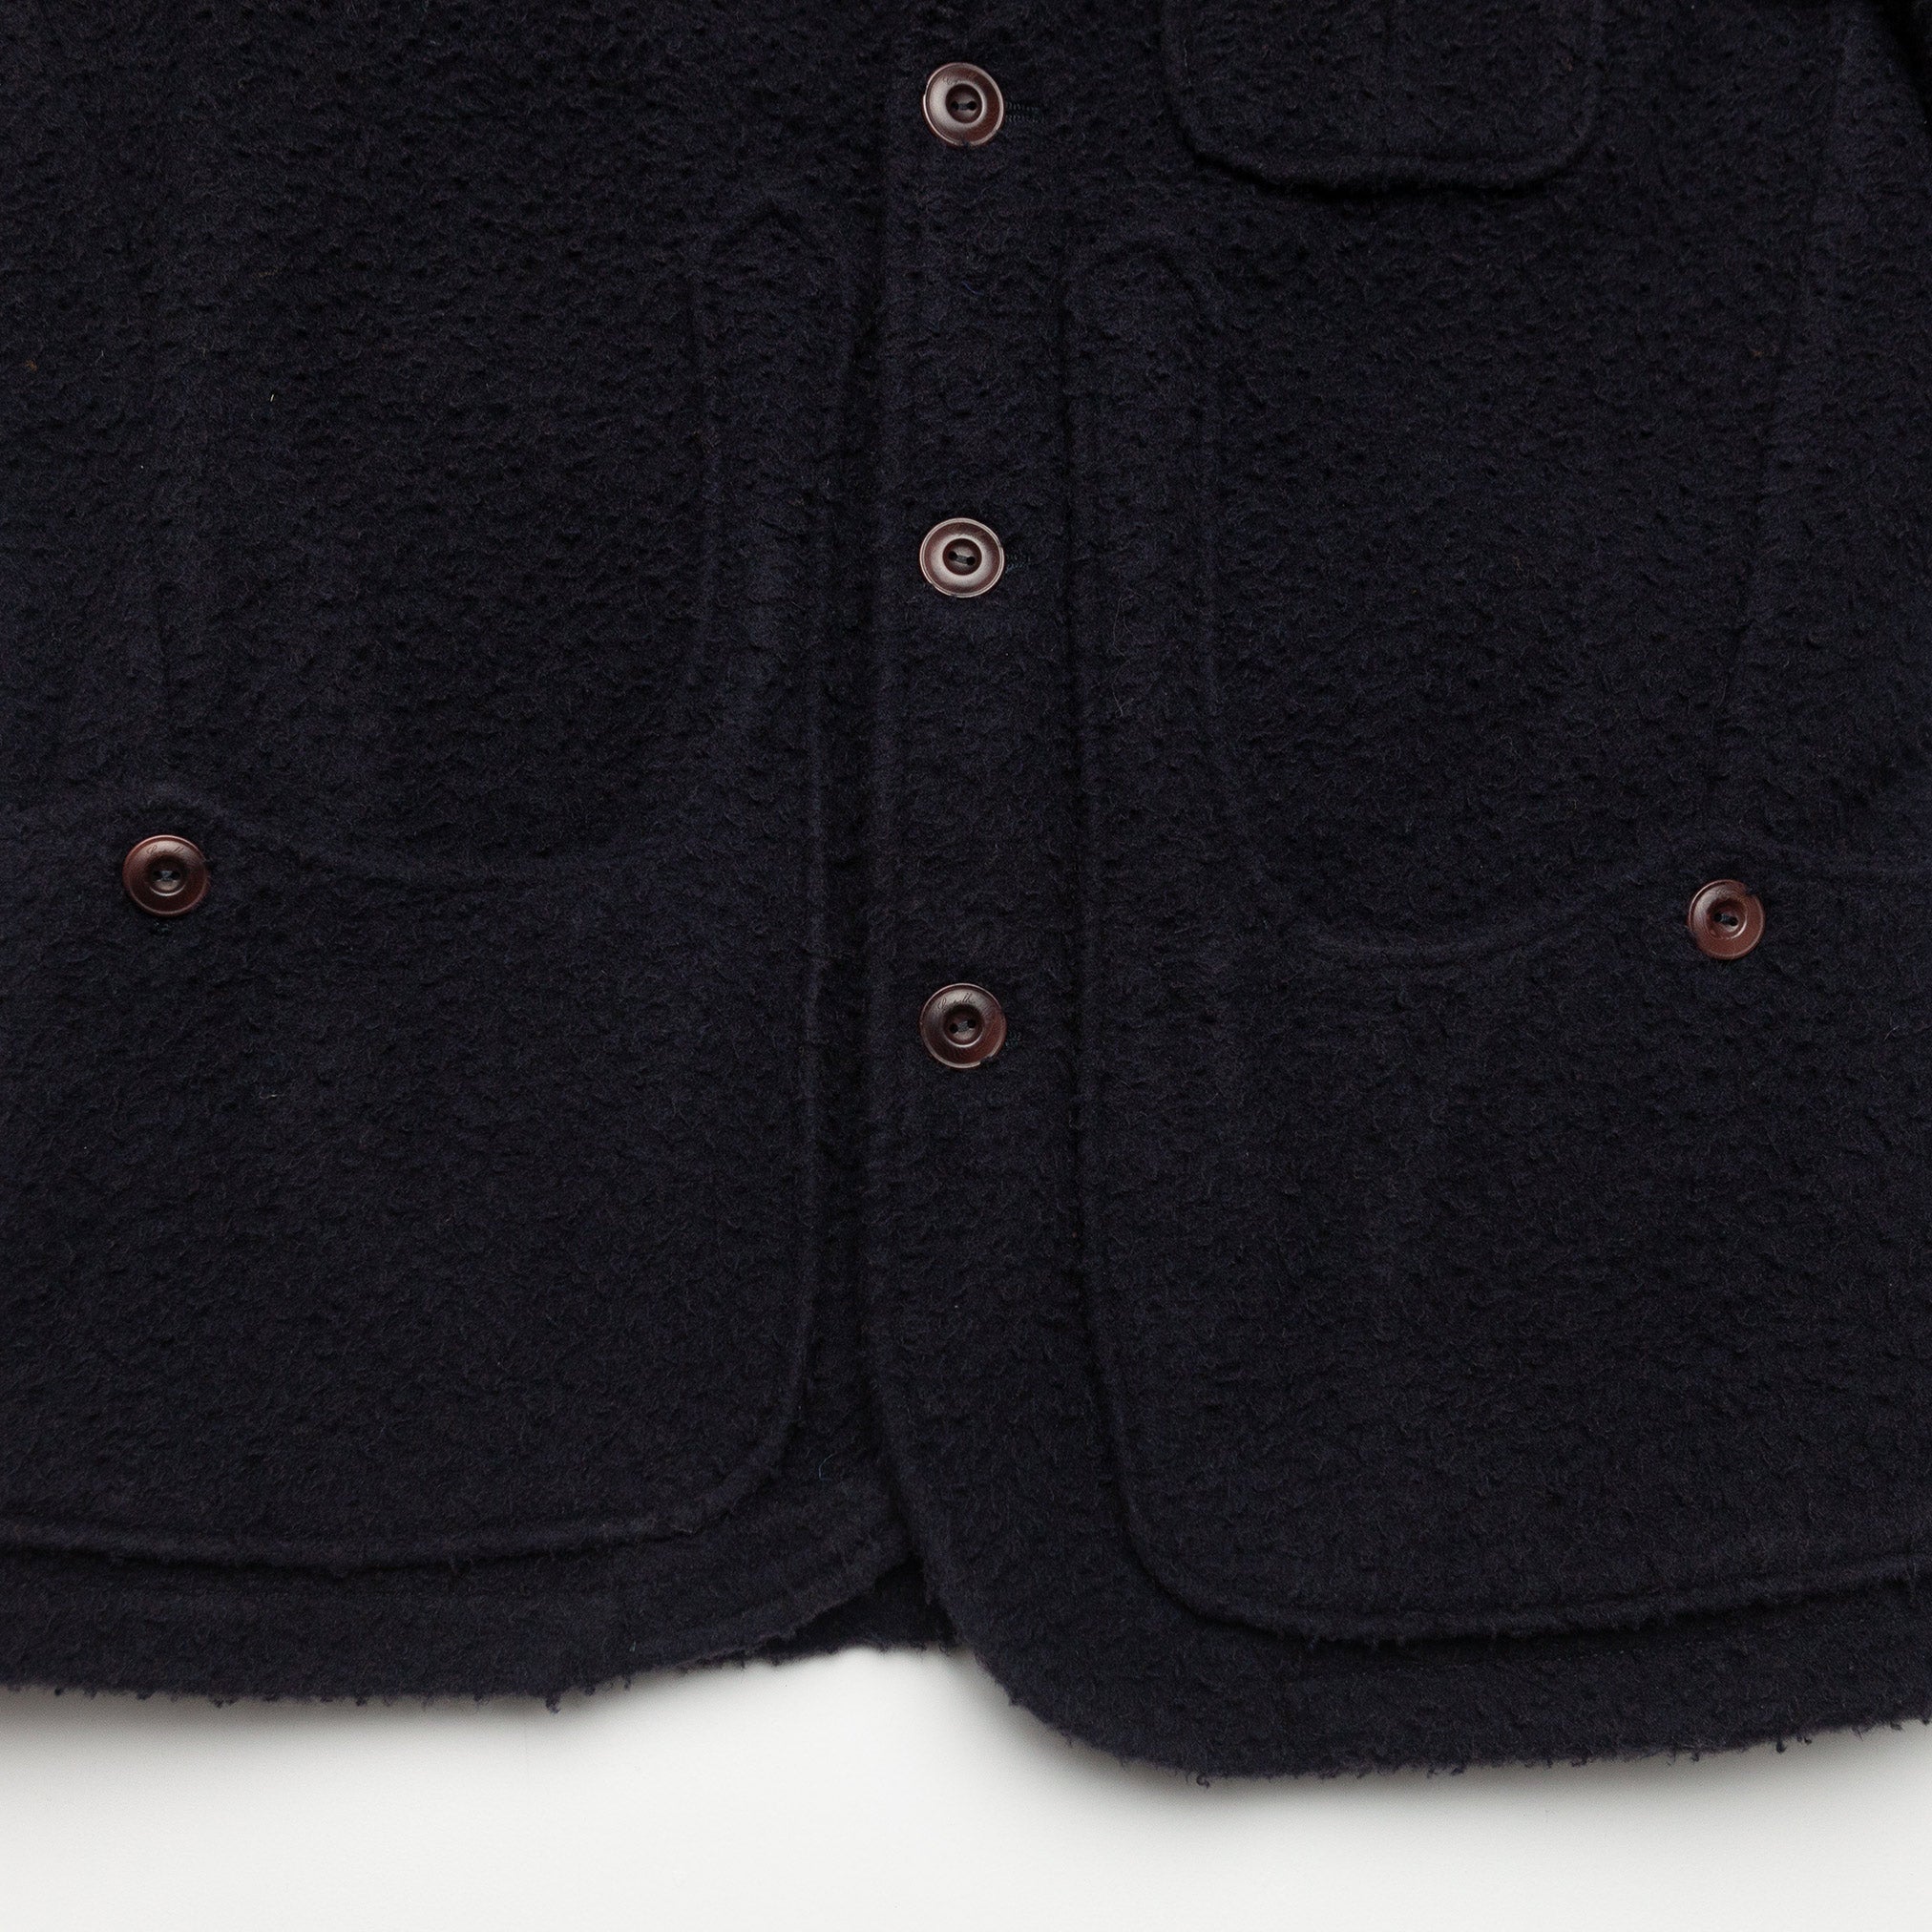 The Iconic Jacket in Navy Casentino Wool